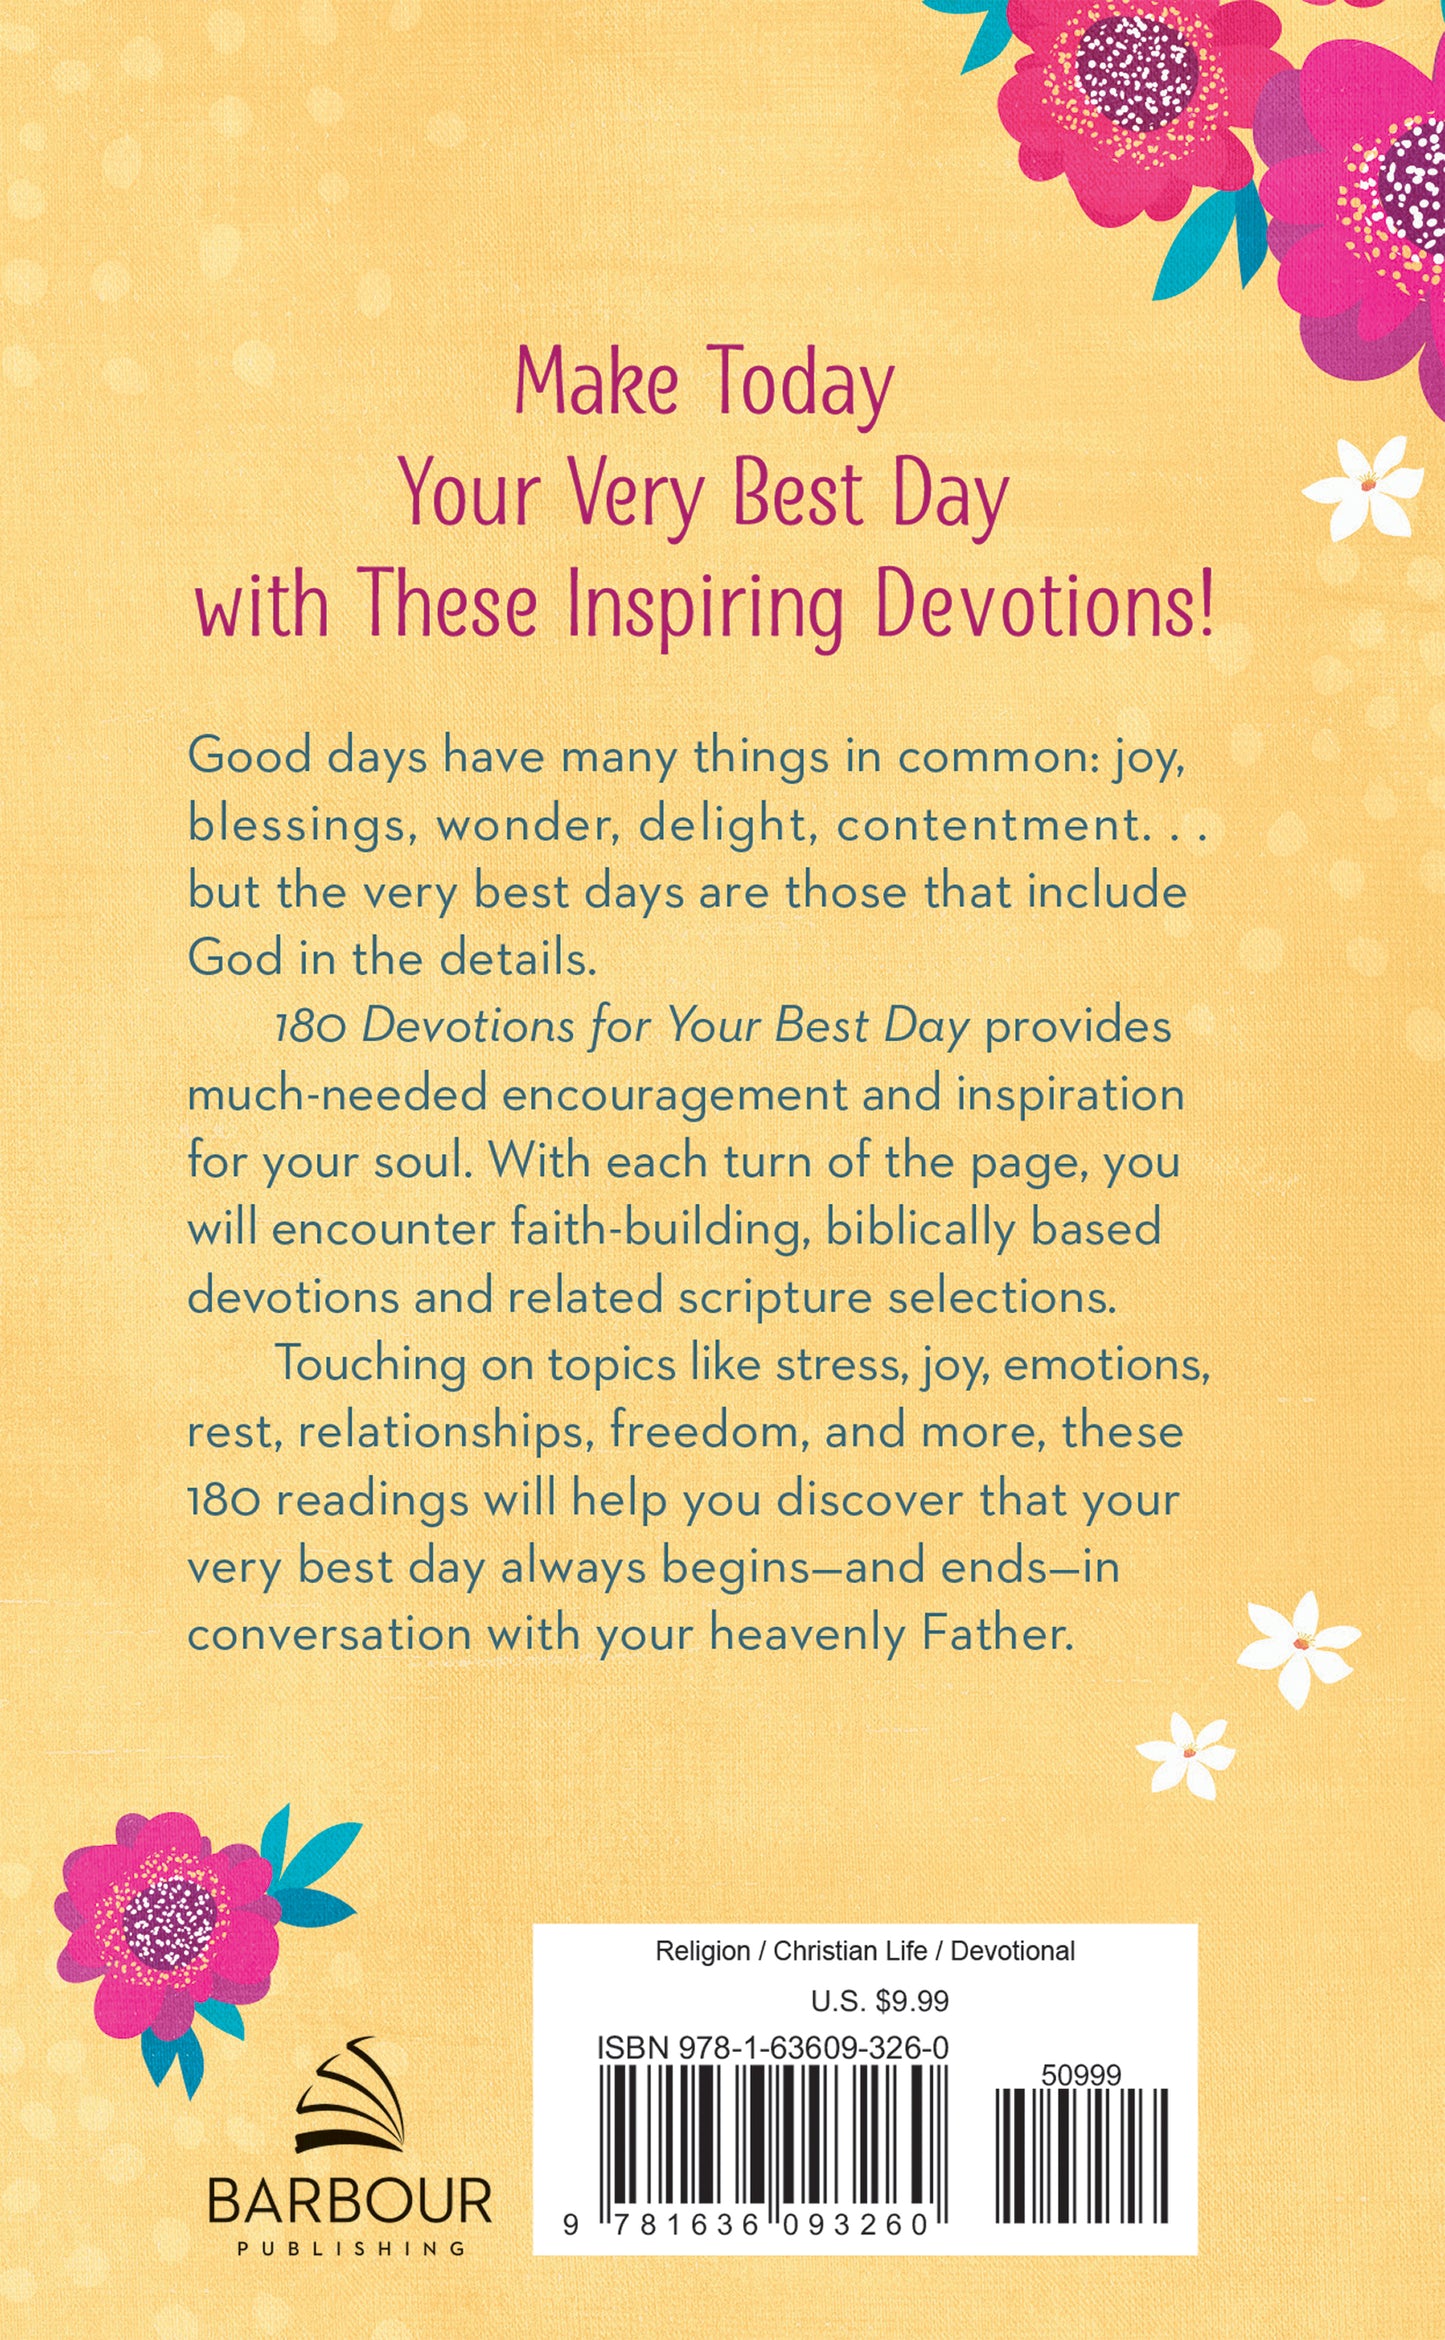 180 Devotions for Your Best Day - The Christian Gift Company